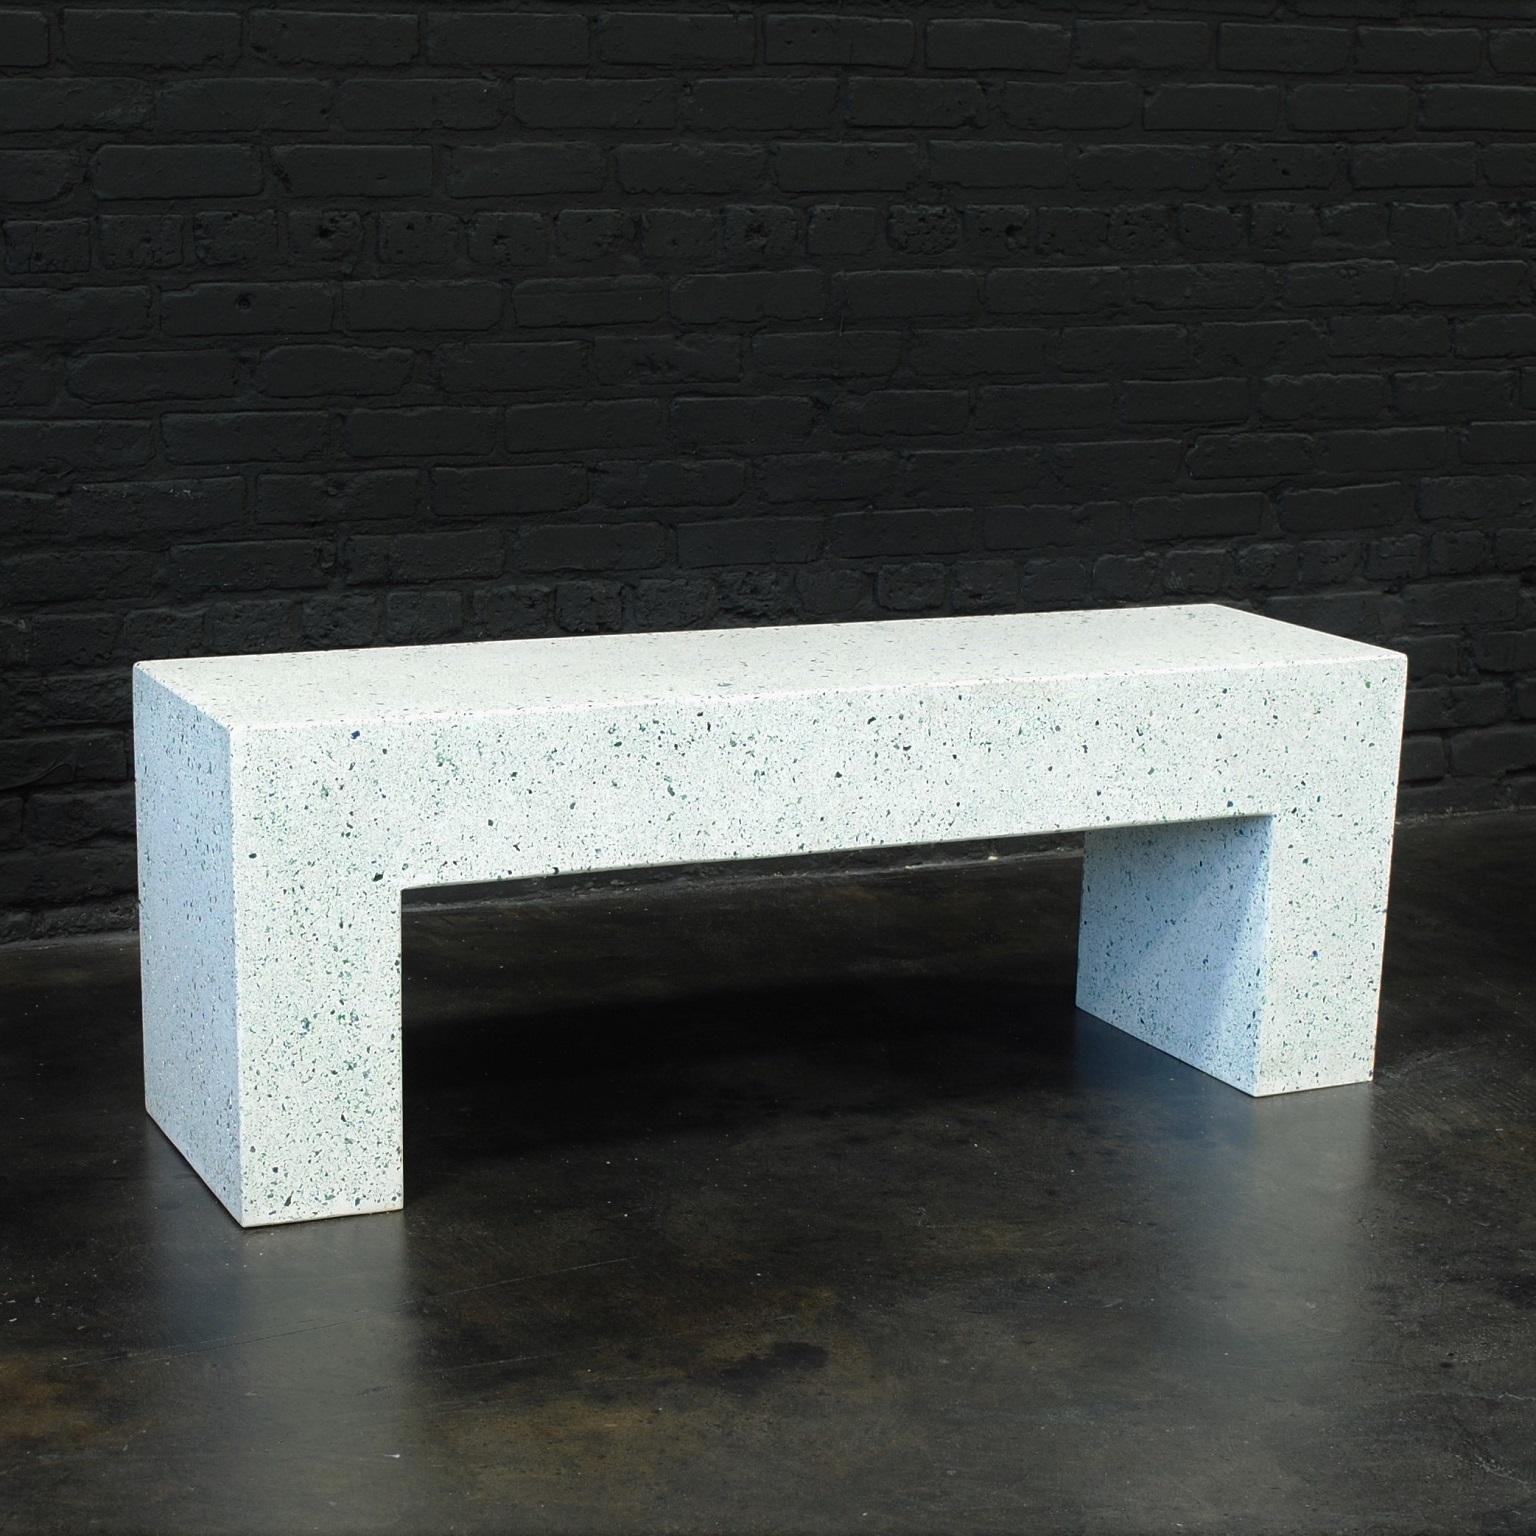 Extreme function. The Aspen Bench is a place to recharge after a demanding day. A power pose.

Always exploring for something truly new, Zachary A. developed this method to lift terrazzo from a flat, static surface to an elevated place of admiration